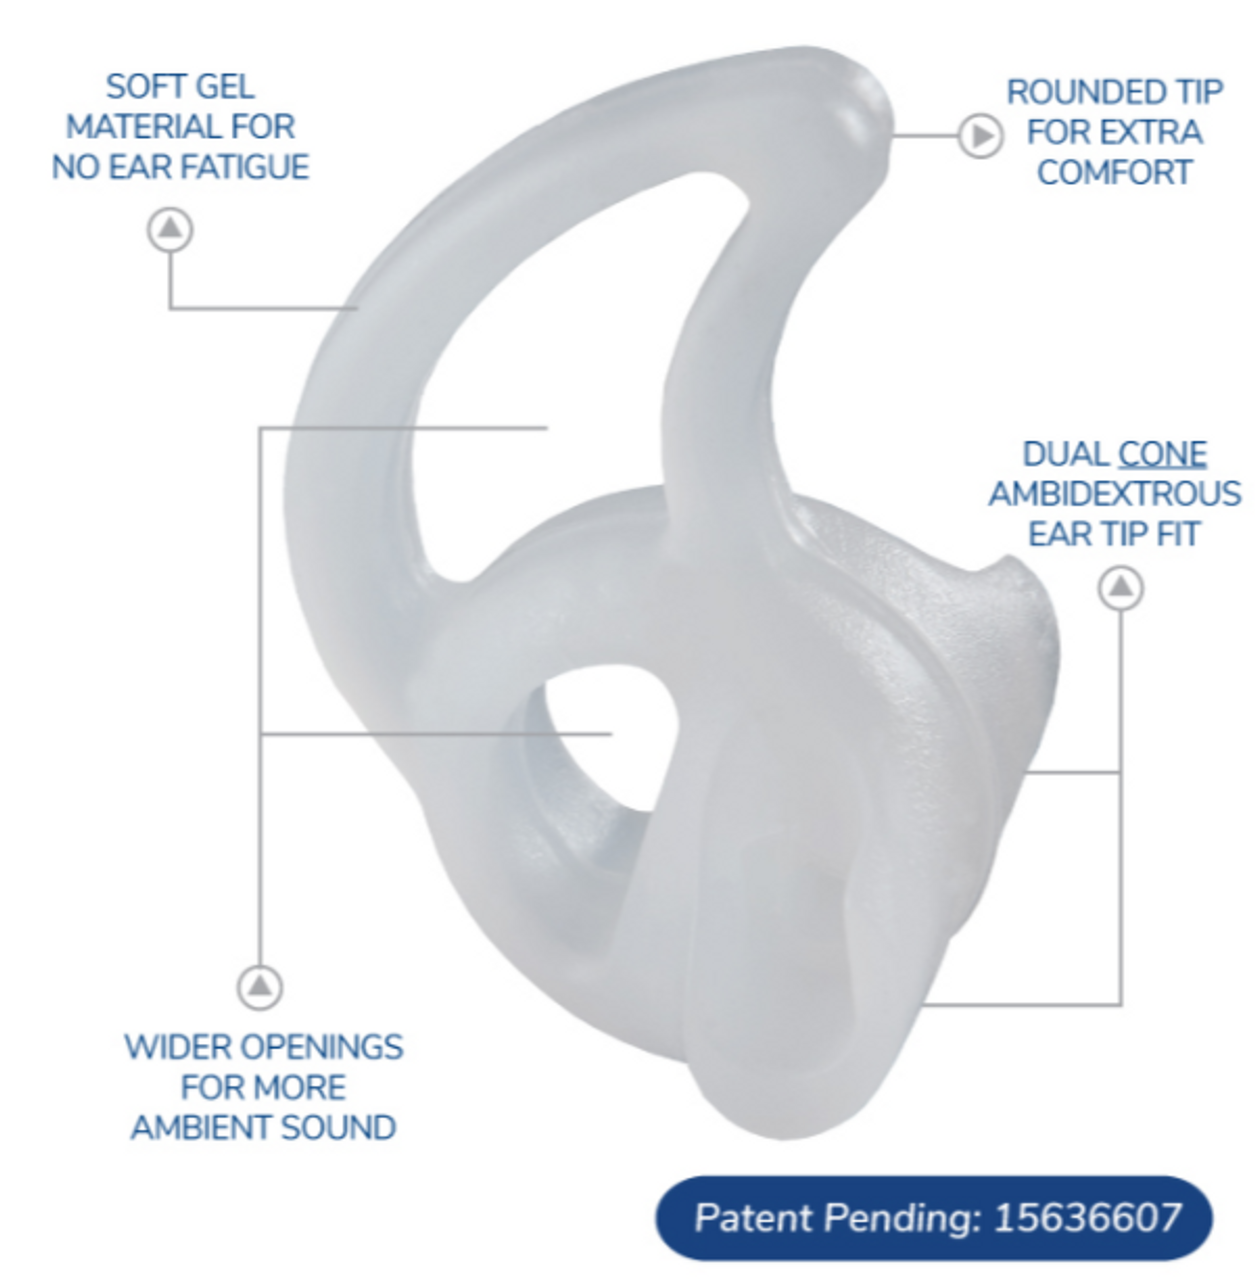 Fin Ultra Ambi Double-Sided All Day Comfort Ear Tips